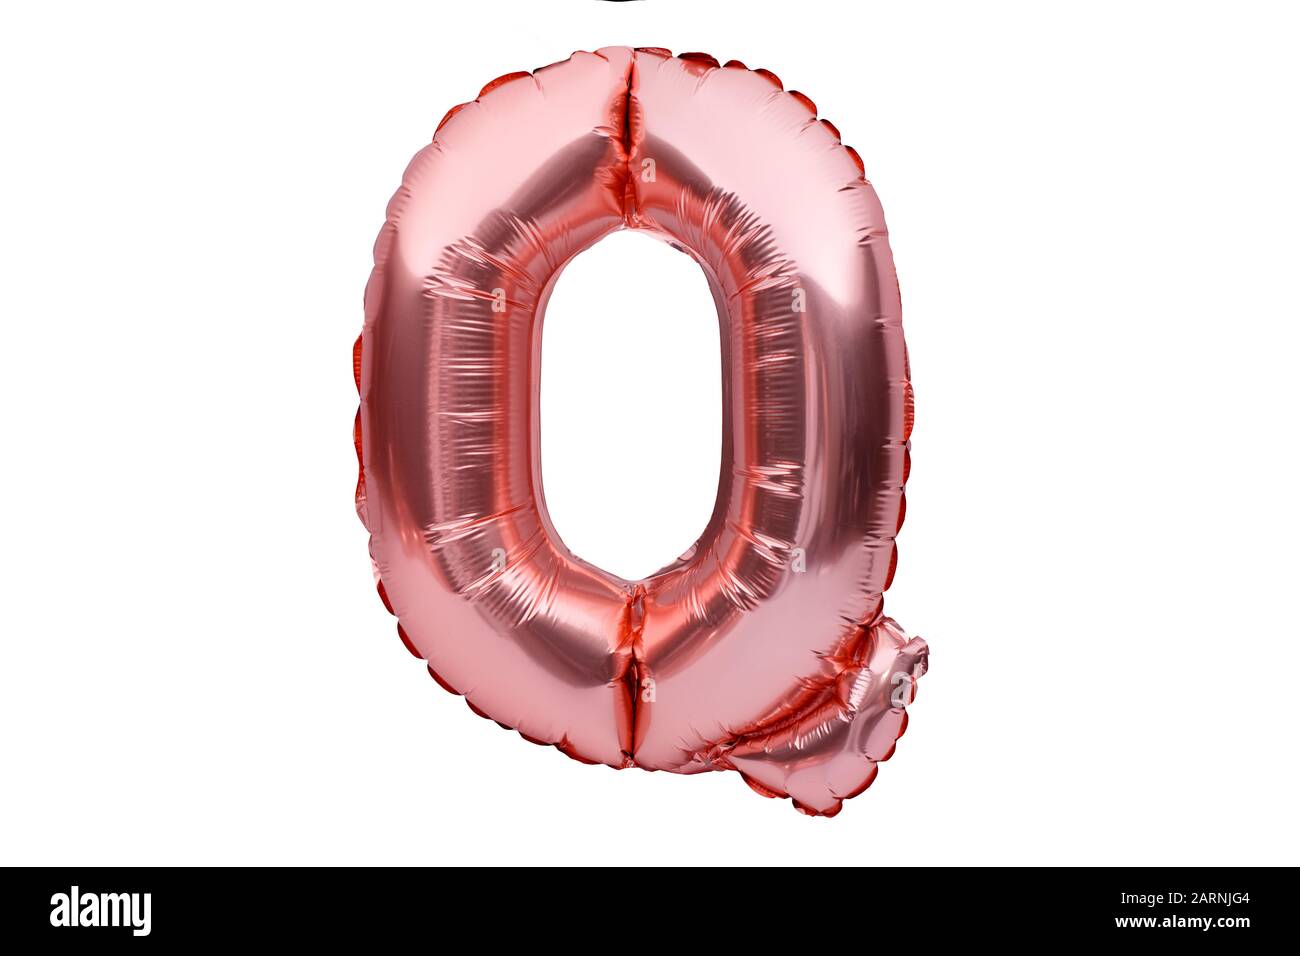 Letter Q made of rose golden inflatable helium balloon isolated on white. Gold pink foil balloon font part of full alphabet set of upper case letters. Stock Photo